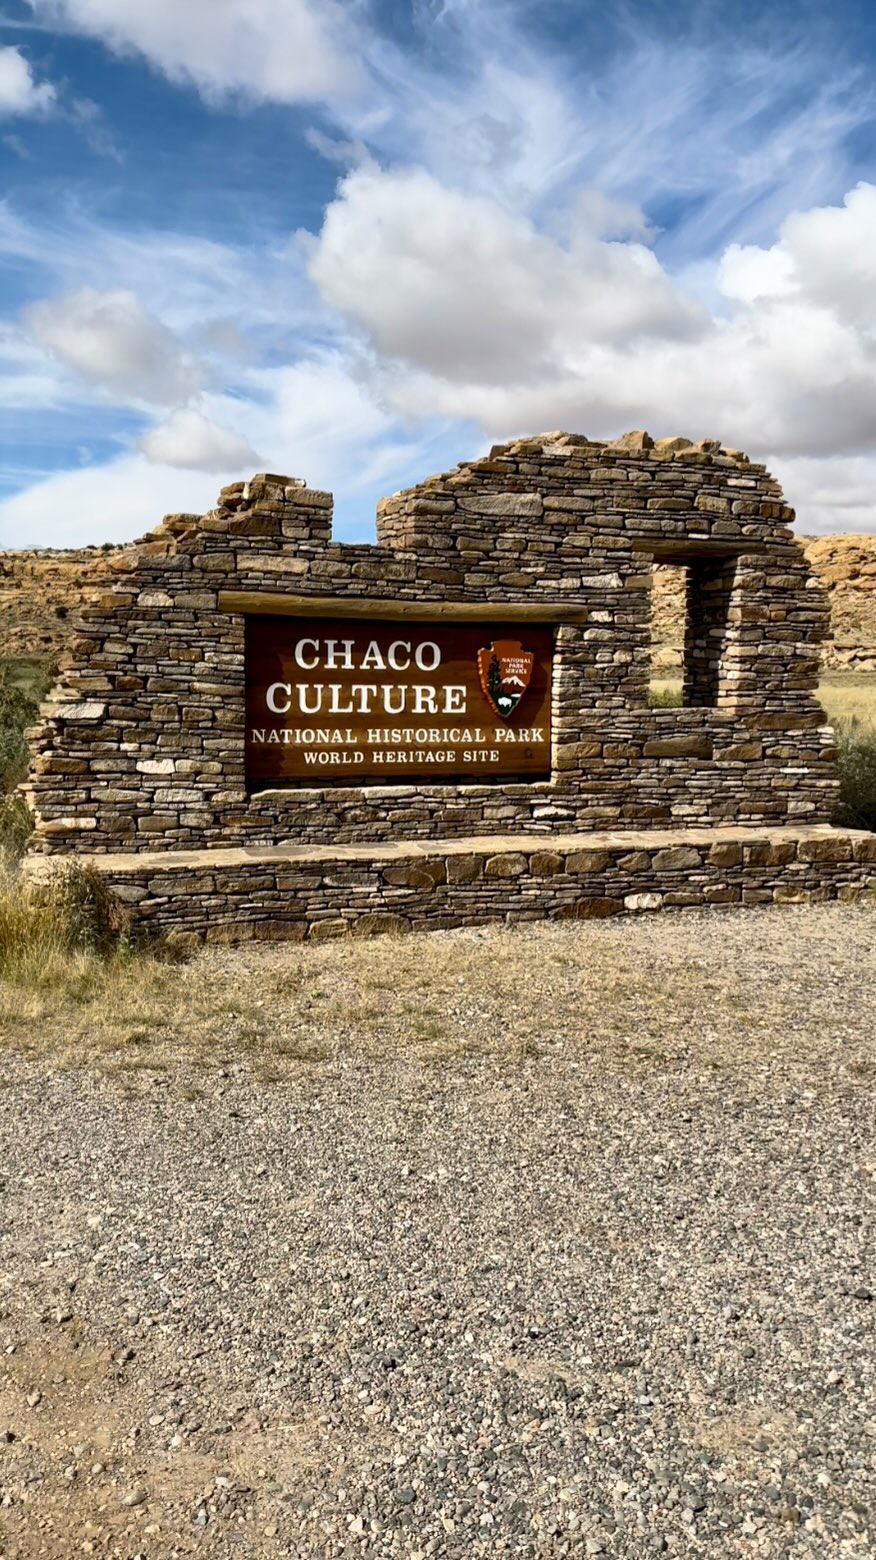 We finally had a chance to visit Chaco Culture last month, the crown jewel of archaeological sites in the NPS system. The park preserves the massive buildings of the Ancestral Puebloan people who lived here more than a thousand years ago. 

You can easily access six major sites along the 9-mile Canyon Loop Drive. But for more of an adventure, hike one of the 4 backcountry trails that take you to remote Chacoan sites where you’ll find ancient roads, petroglyphs, stairways, and spectacular overlooks of the valley.

If you’re planning to visit, check the park’s website before you go. The roads leading into the park can wash out during bad weather.

Have you been to this incredible park yet?